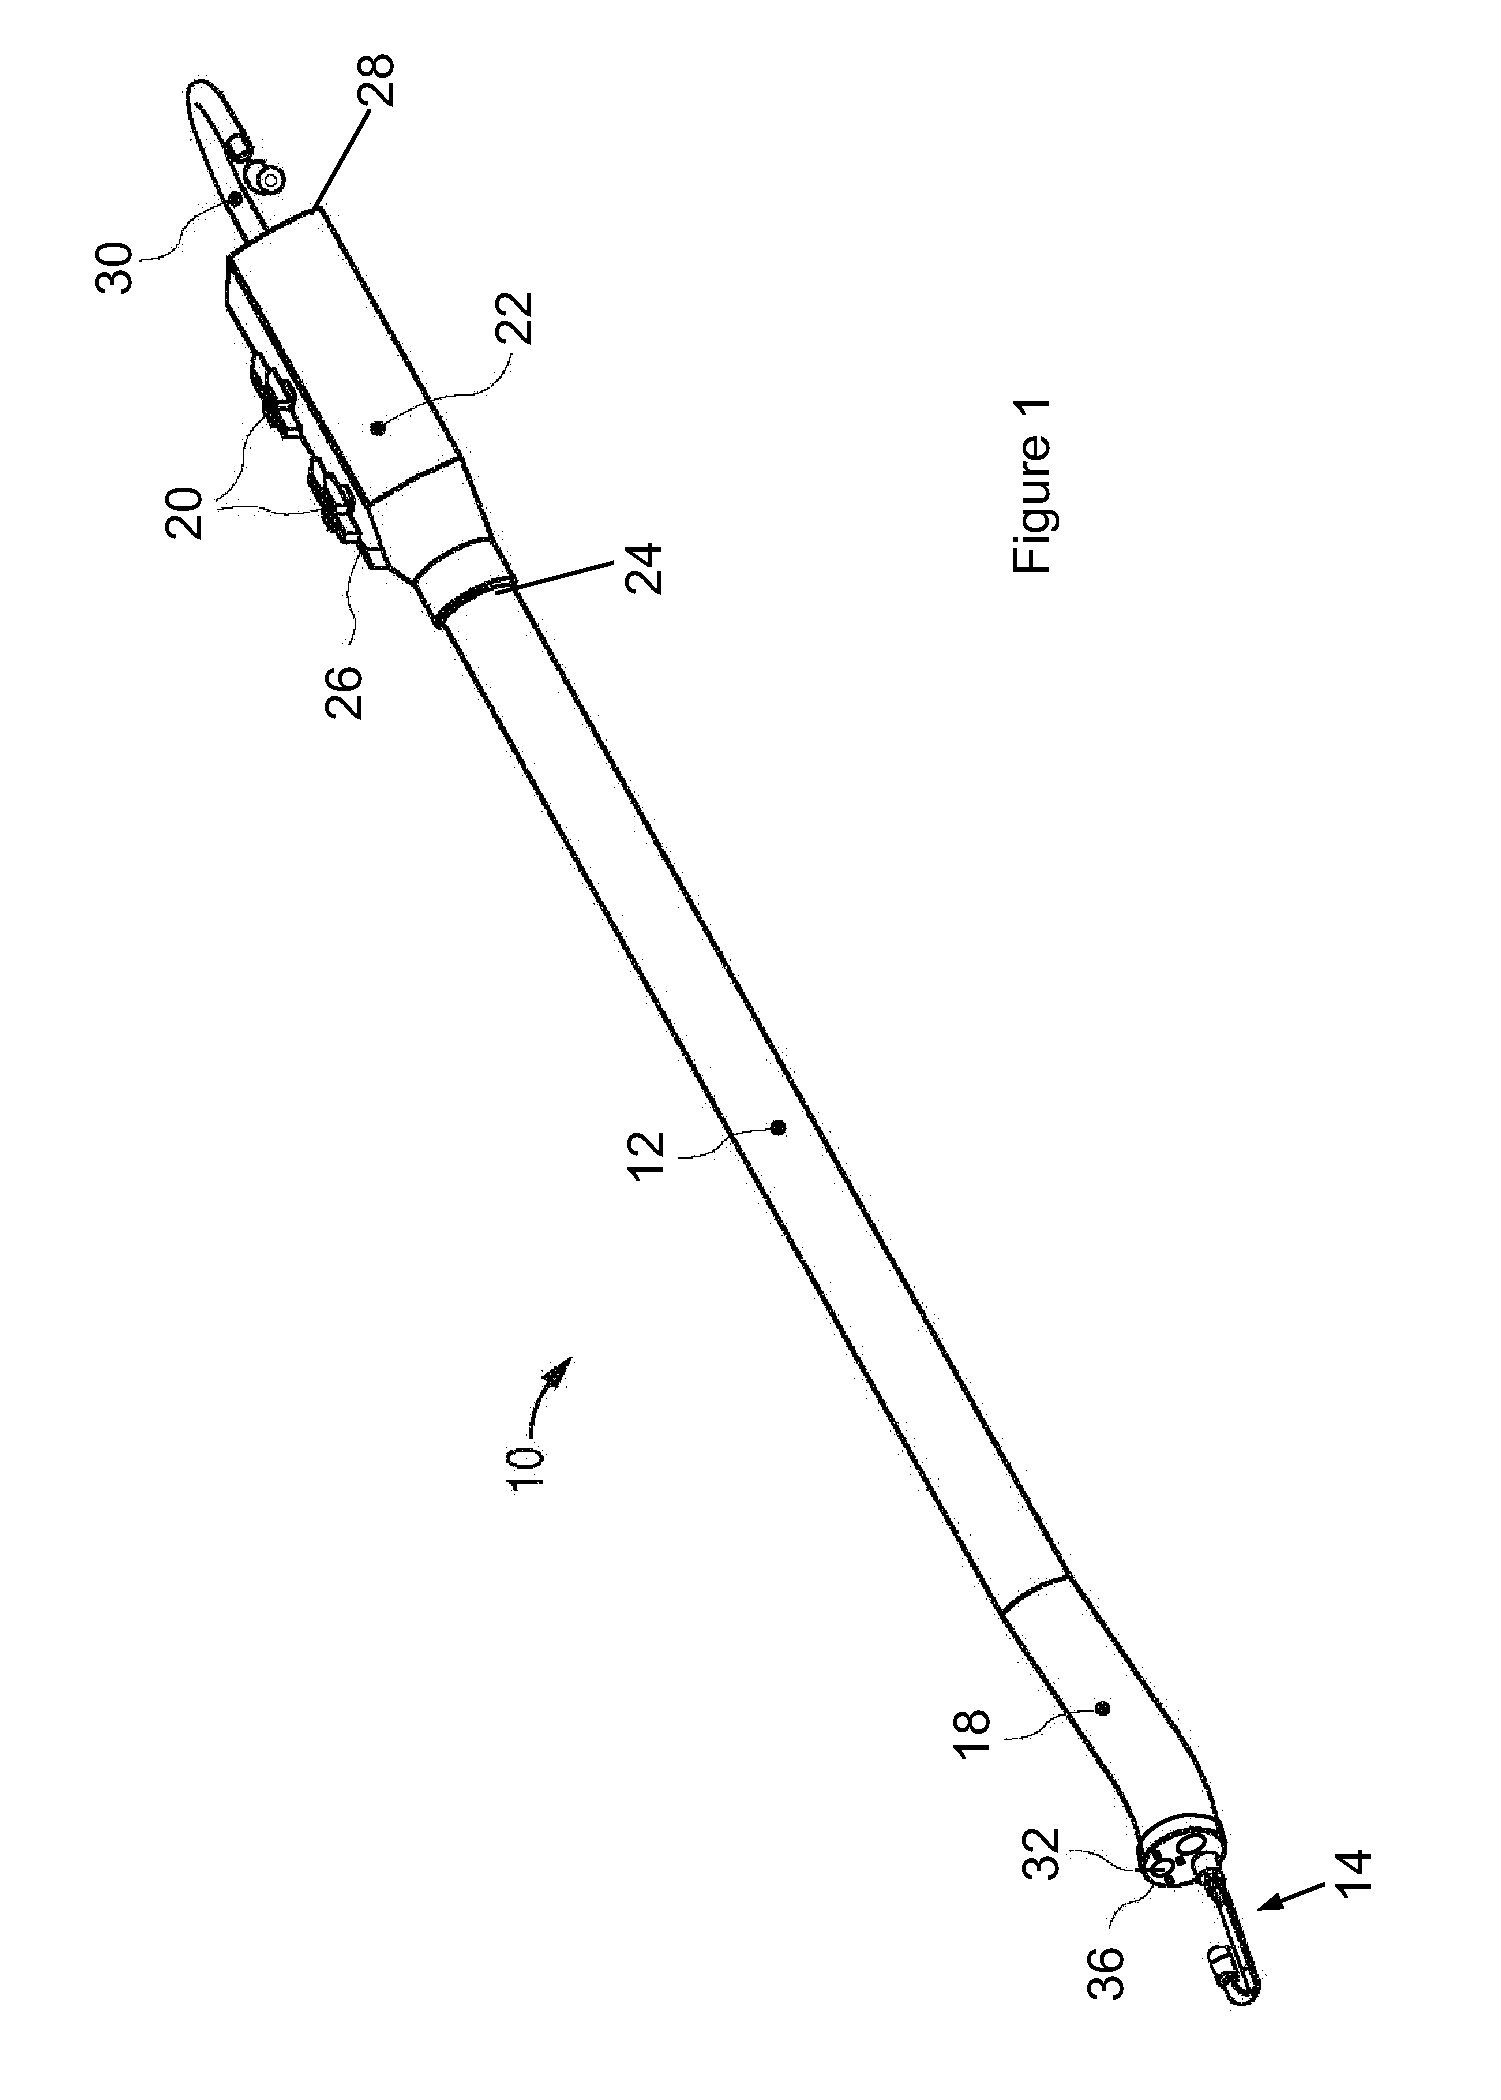 Endoscope assembly with a polarizing filter